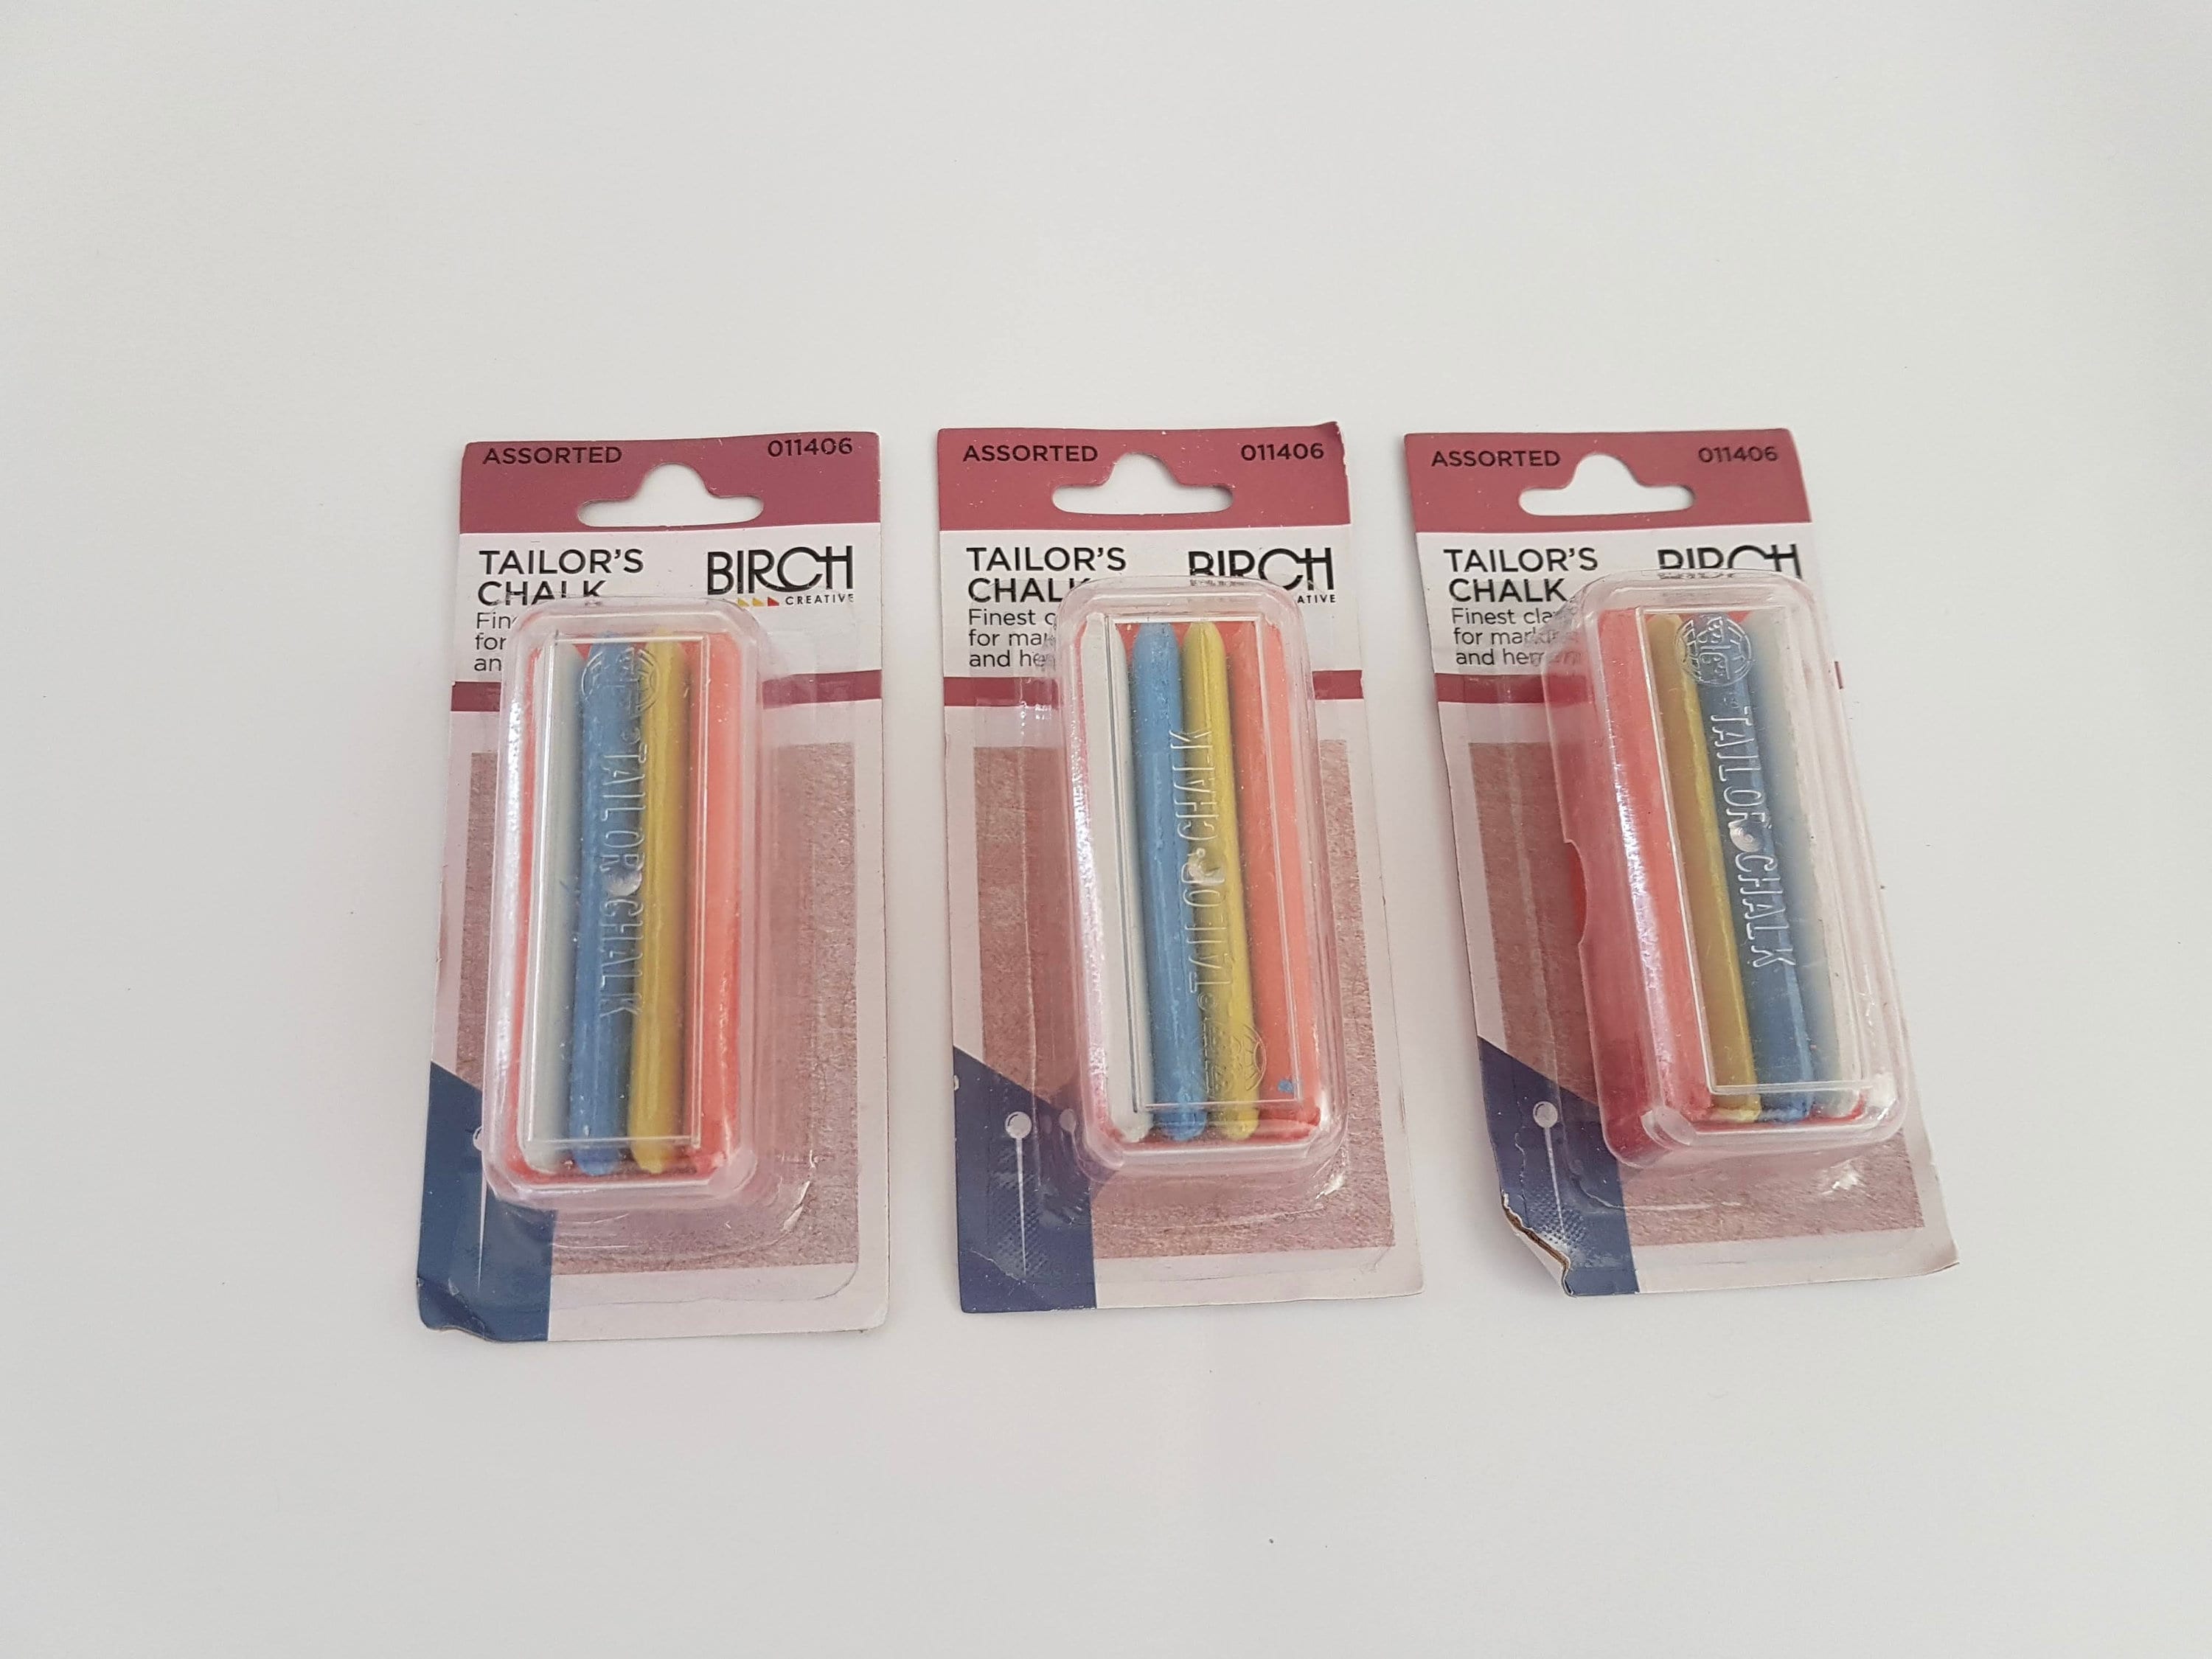 Tailors Chalk,Sewing Fabric Chalk and Fabric Markers for Quilting,10PCS Tailors Chalk,4PCS Heat Erasable Fabric Marking Pens with 4 Refills,3 Pcs